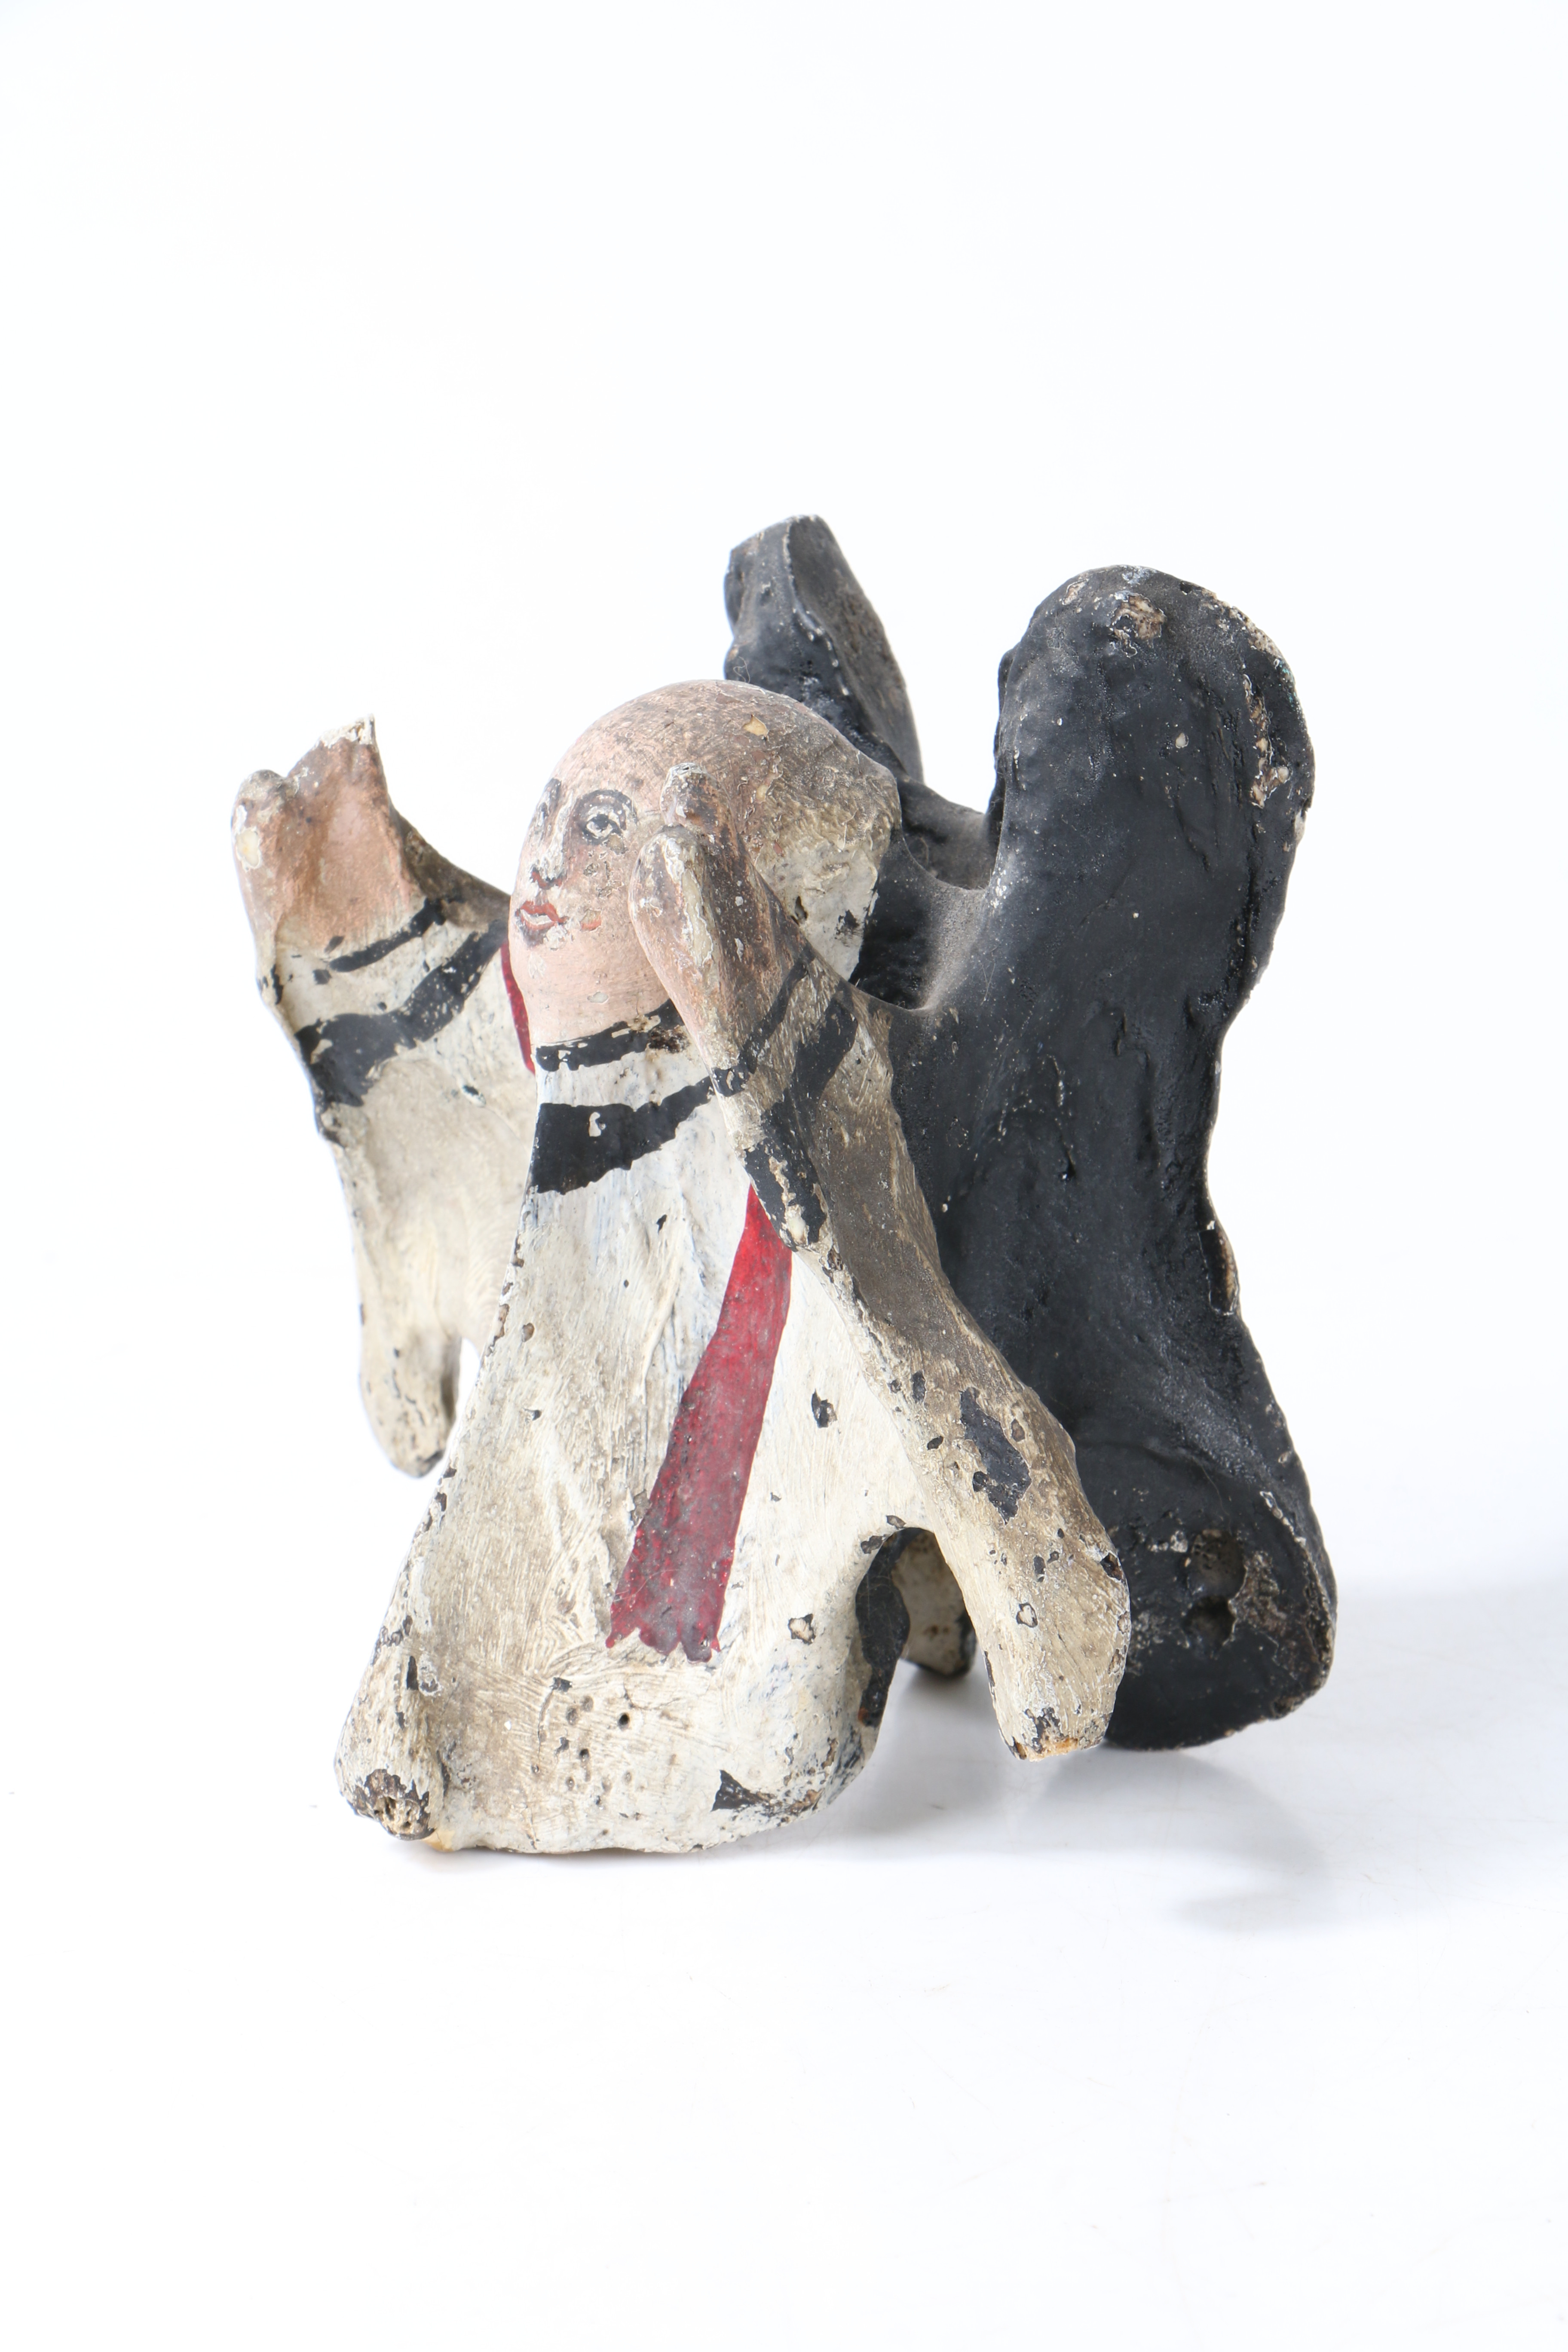 A UNUSUAL 19TH CENTURY PAINTED WHALE VERTEBRAE IN THE FORM OF JOHN WESLEY. - Image 4 of 7